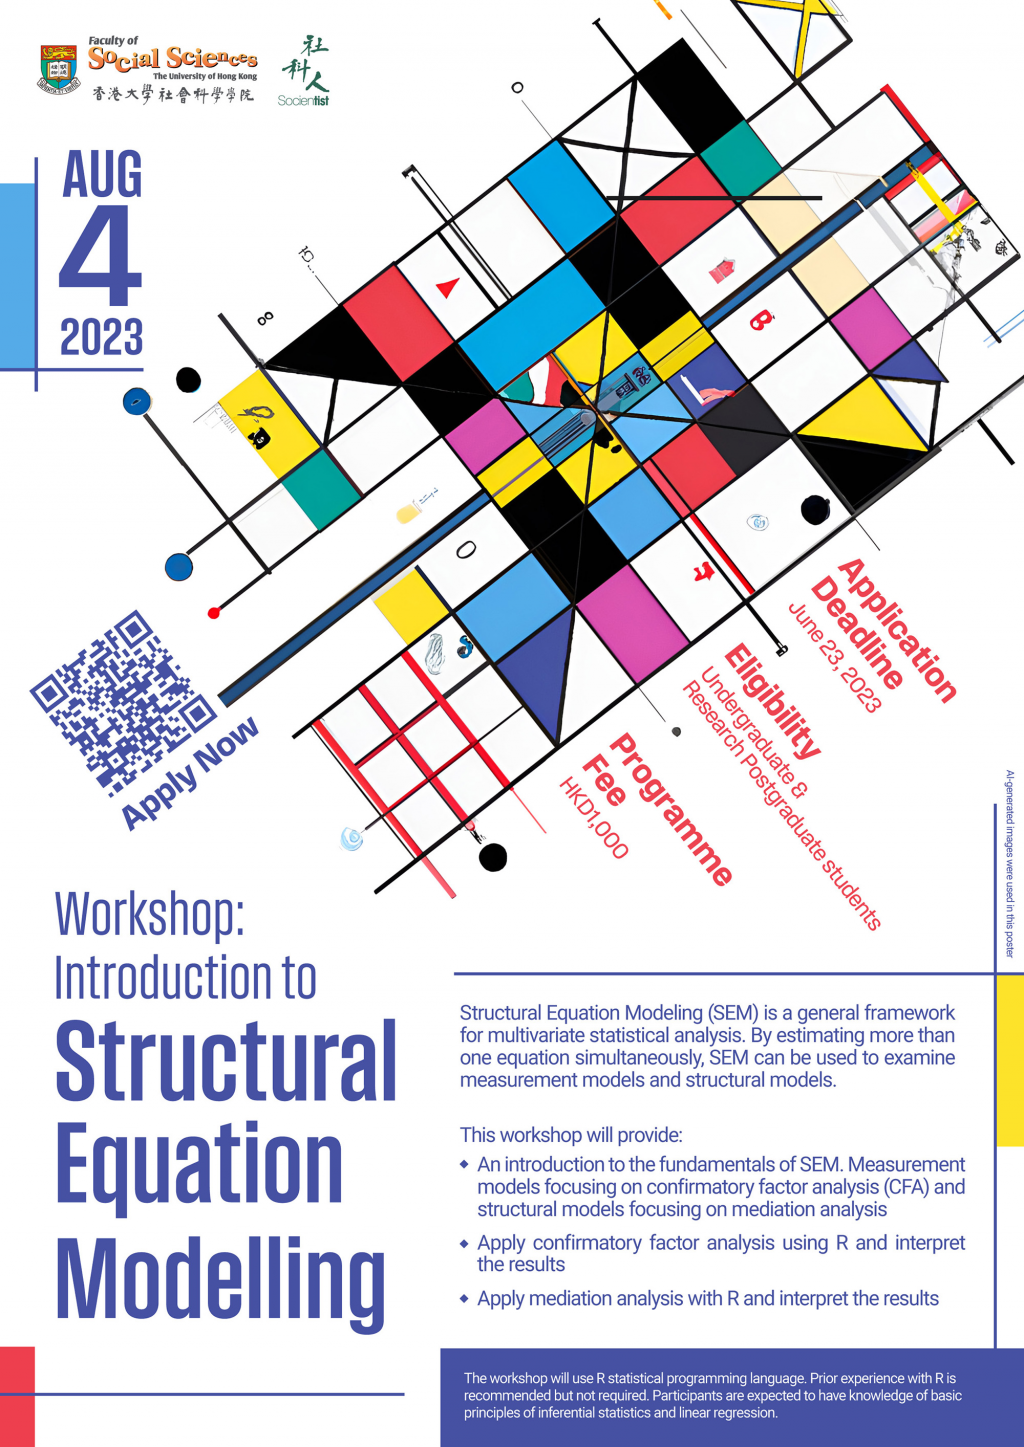 Workshop: Introduction to Structural Equation Modelling